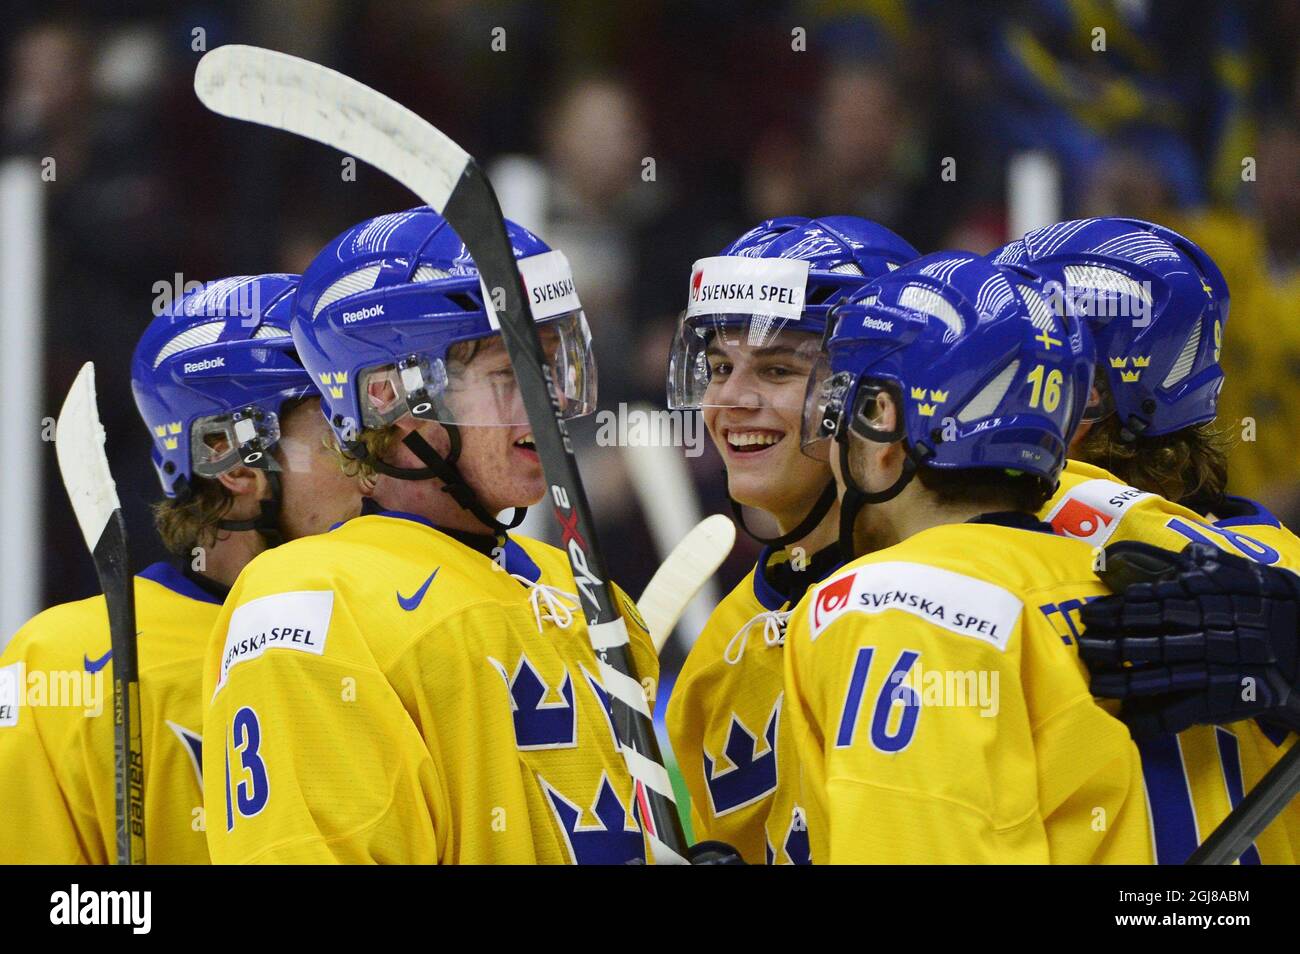 MALMO 2013-12-29 Sweden's Andre Burakowsky (C) celebrates with teammates Gustav Olofsson (nr 13, L) and Filip Forsberg (nr 16, R) after scoring the 0-3 goal during the IIHF World Junior Championship preliminary round group B icehockey match between Norway and Sweden at Malmo Arena in Malmo, Sweden, on Dec. 29, 2013. Photo: Ludvig Thunman / TT / code 10600  Stock Photo